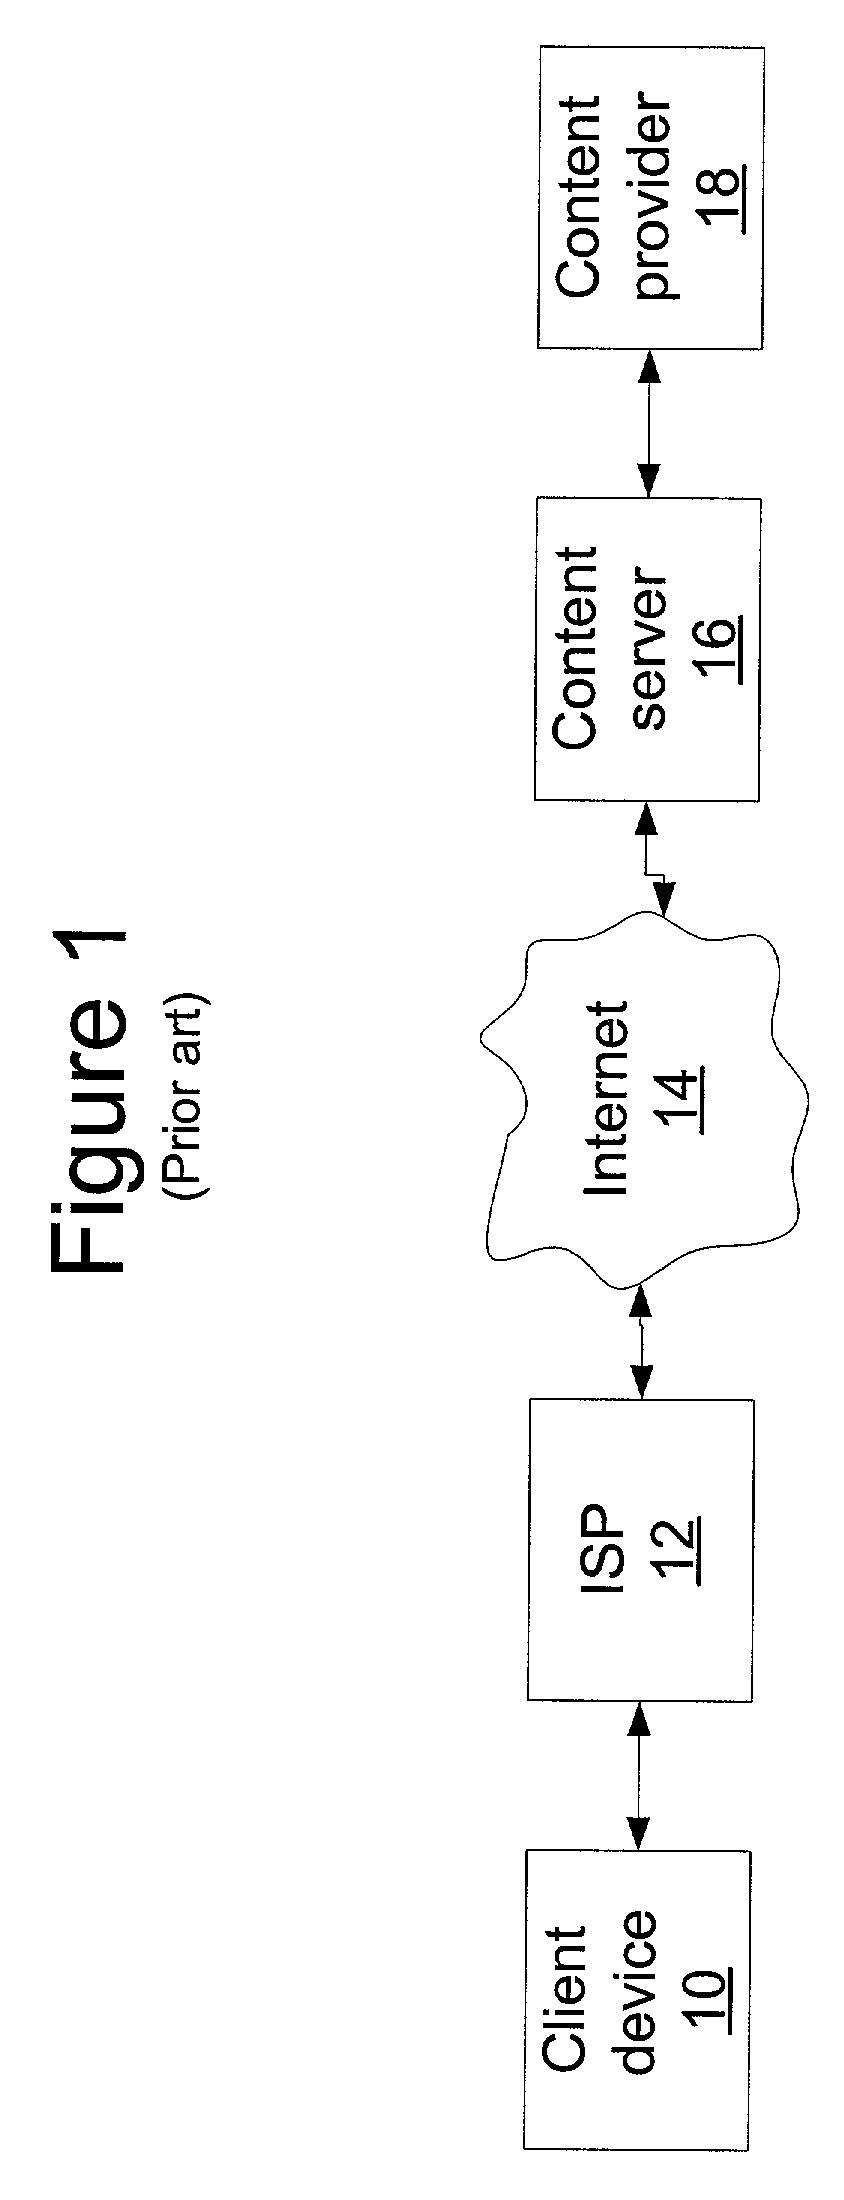 Method and system for providing a central repository for client-specific accessibility